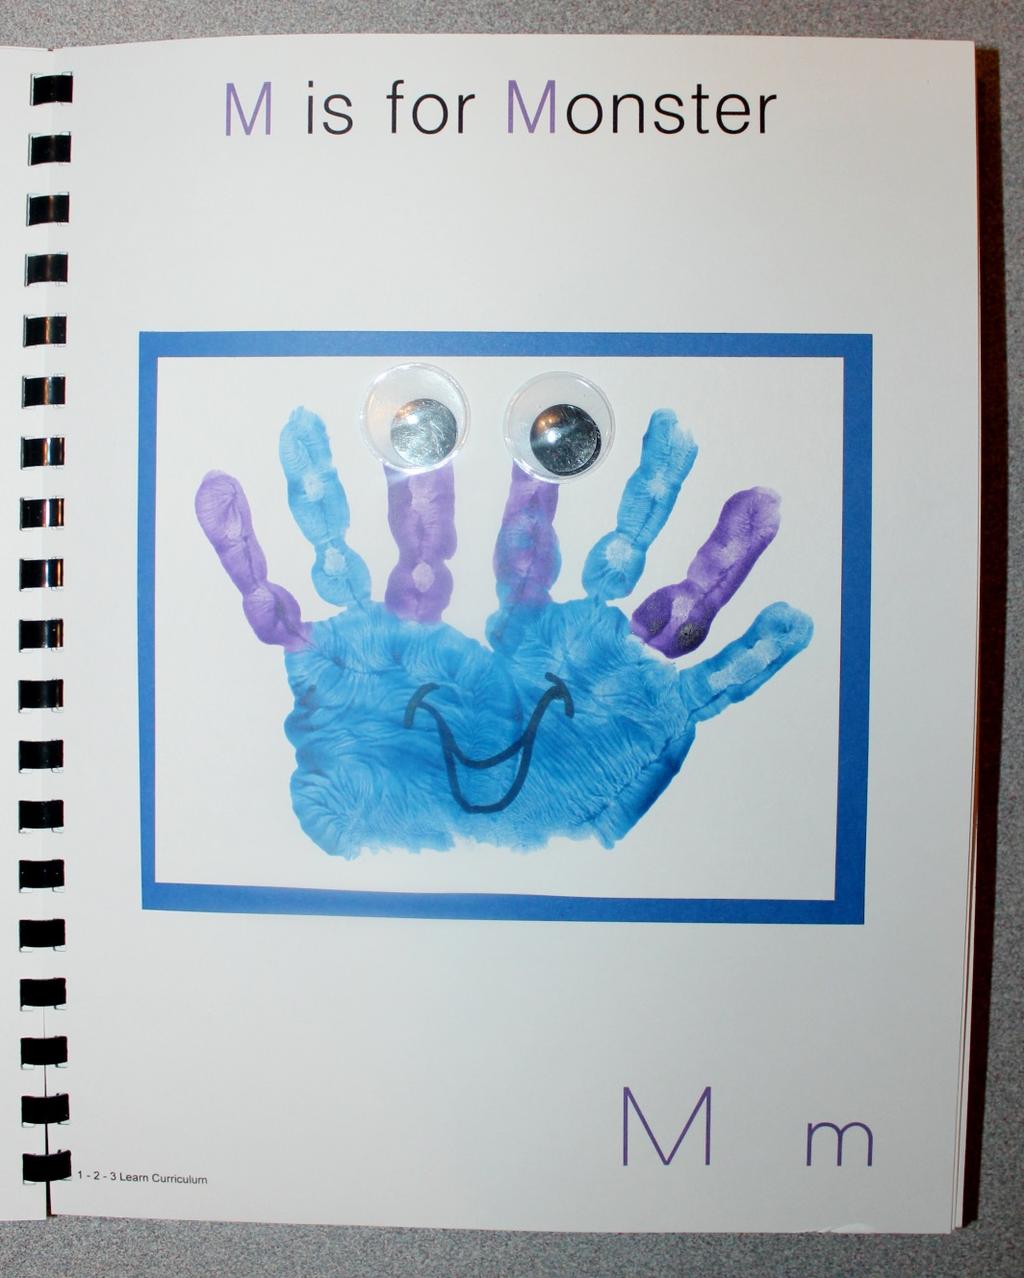 M is for Monster Paint the child s hand blue and alternate painting the fingers blue and purple. (You will not be painting the thumb).